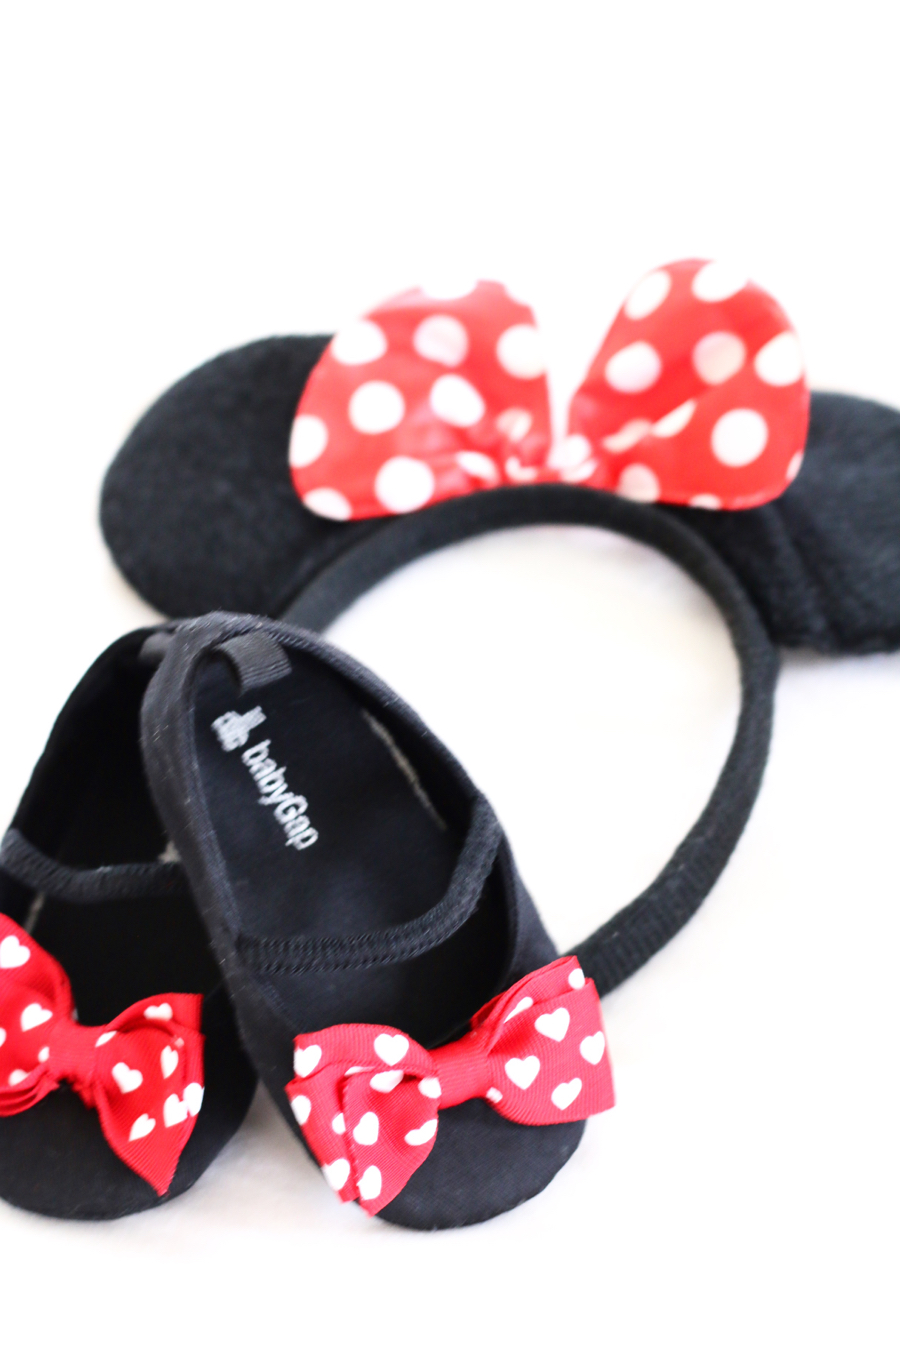 Top 8 Places to Buy Kids Disney Clothes - Brittany Maddux